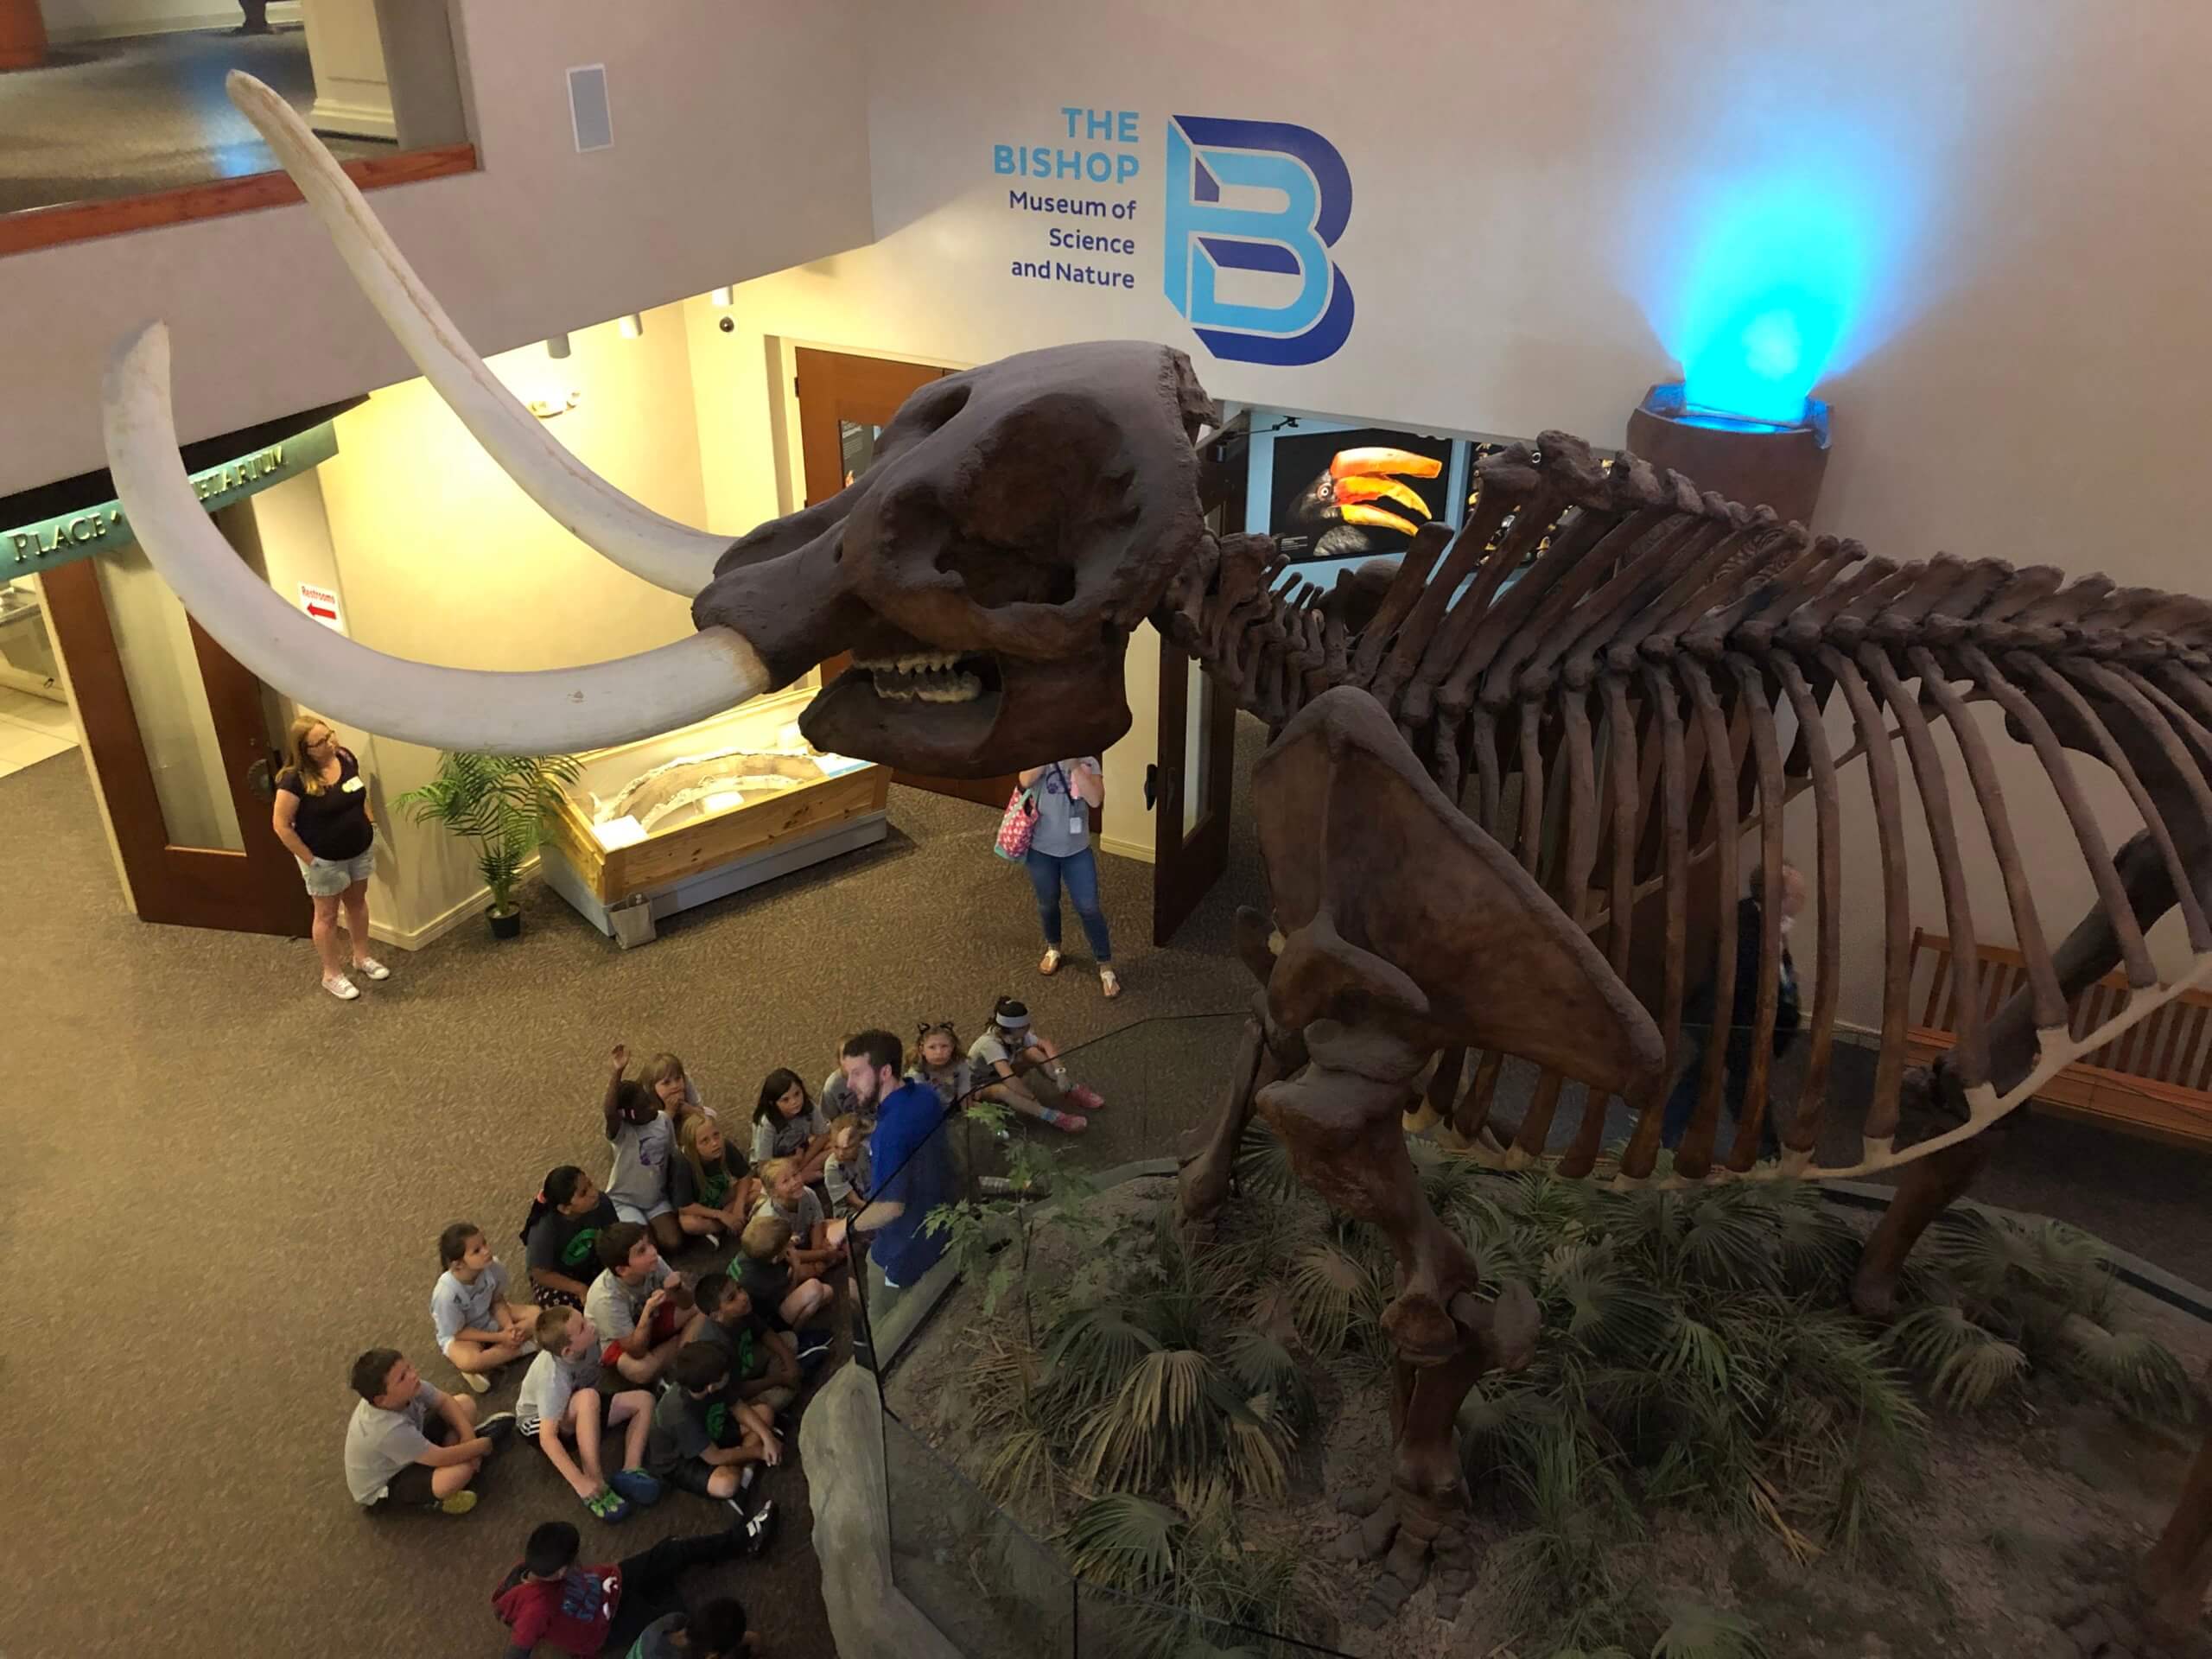 Field trips at The Bishop Museum of Science and Nature